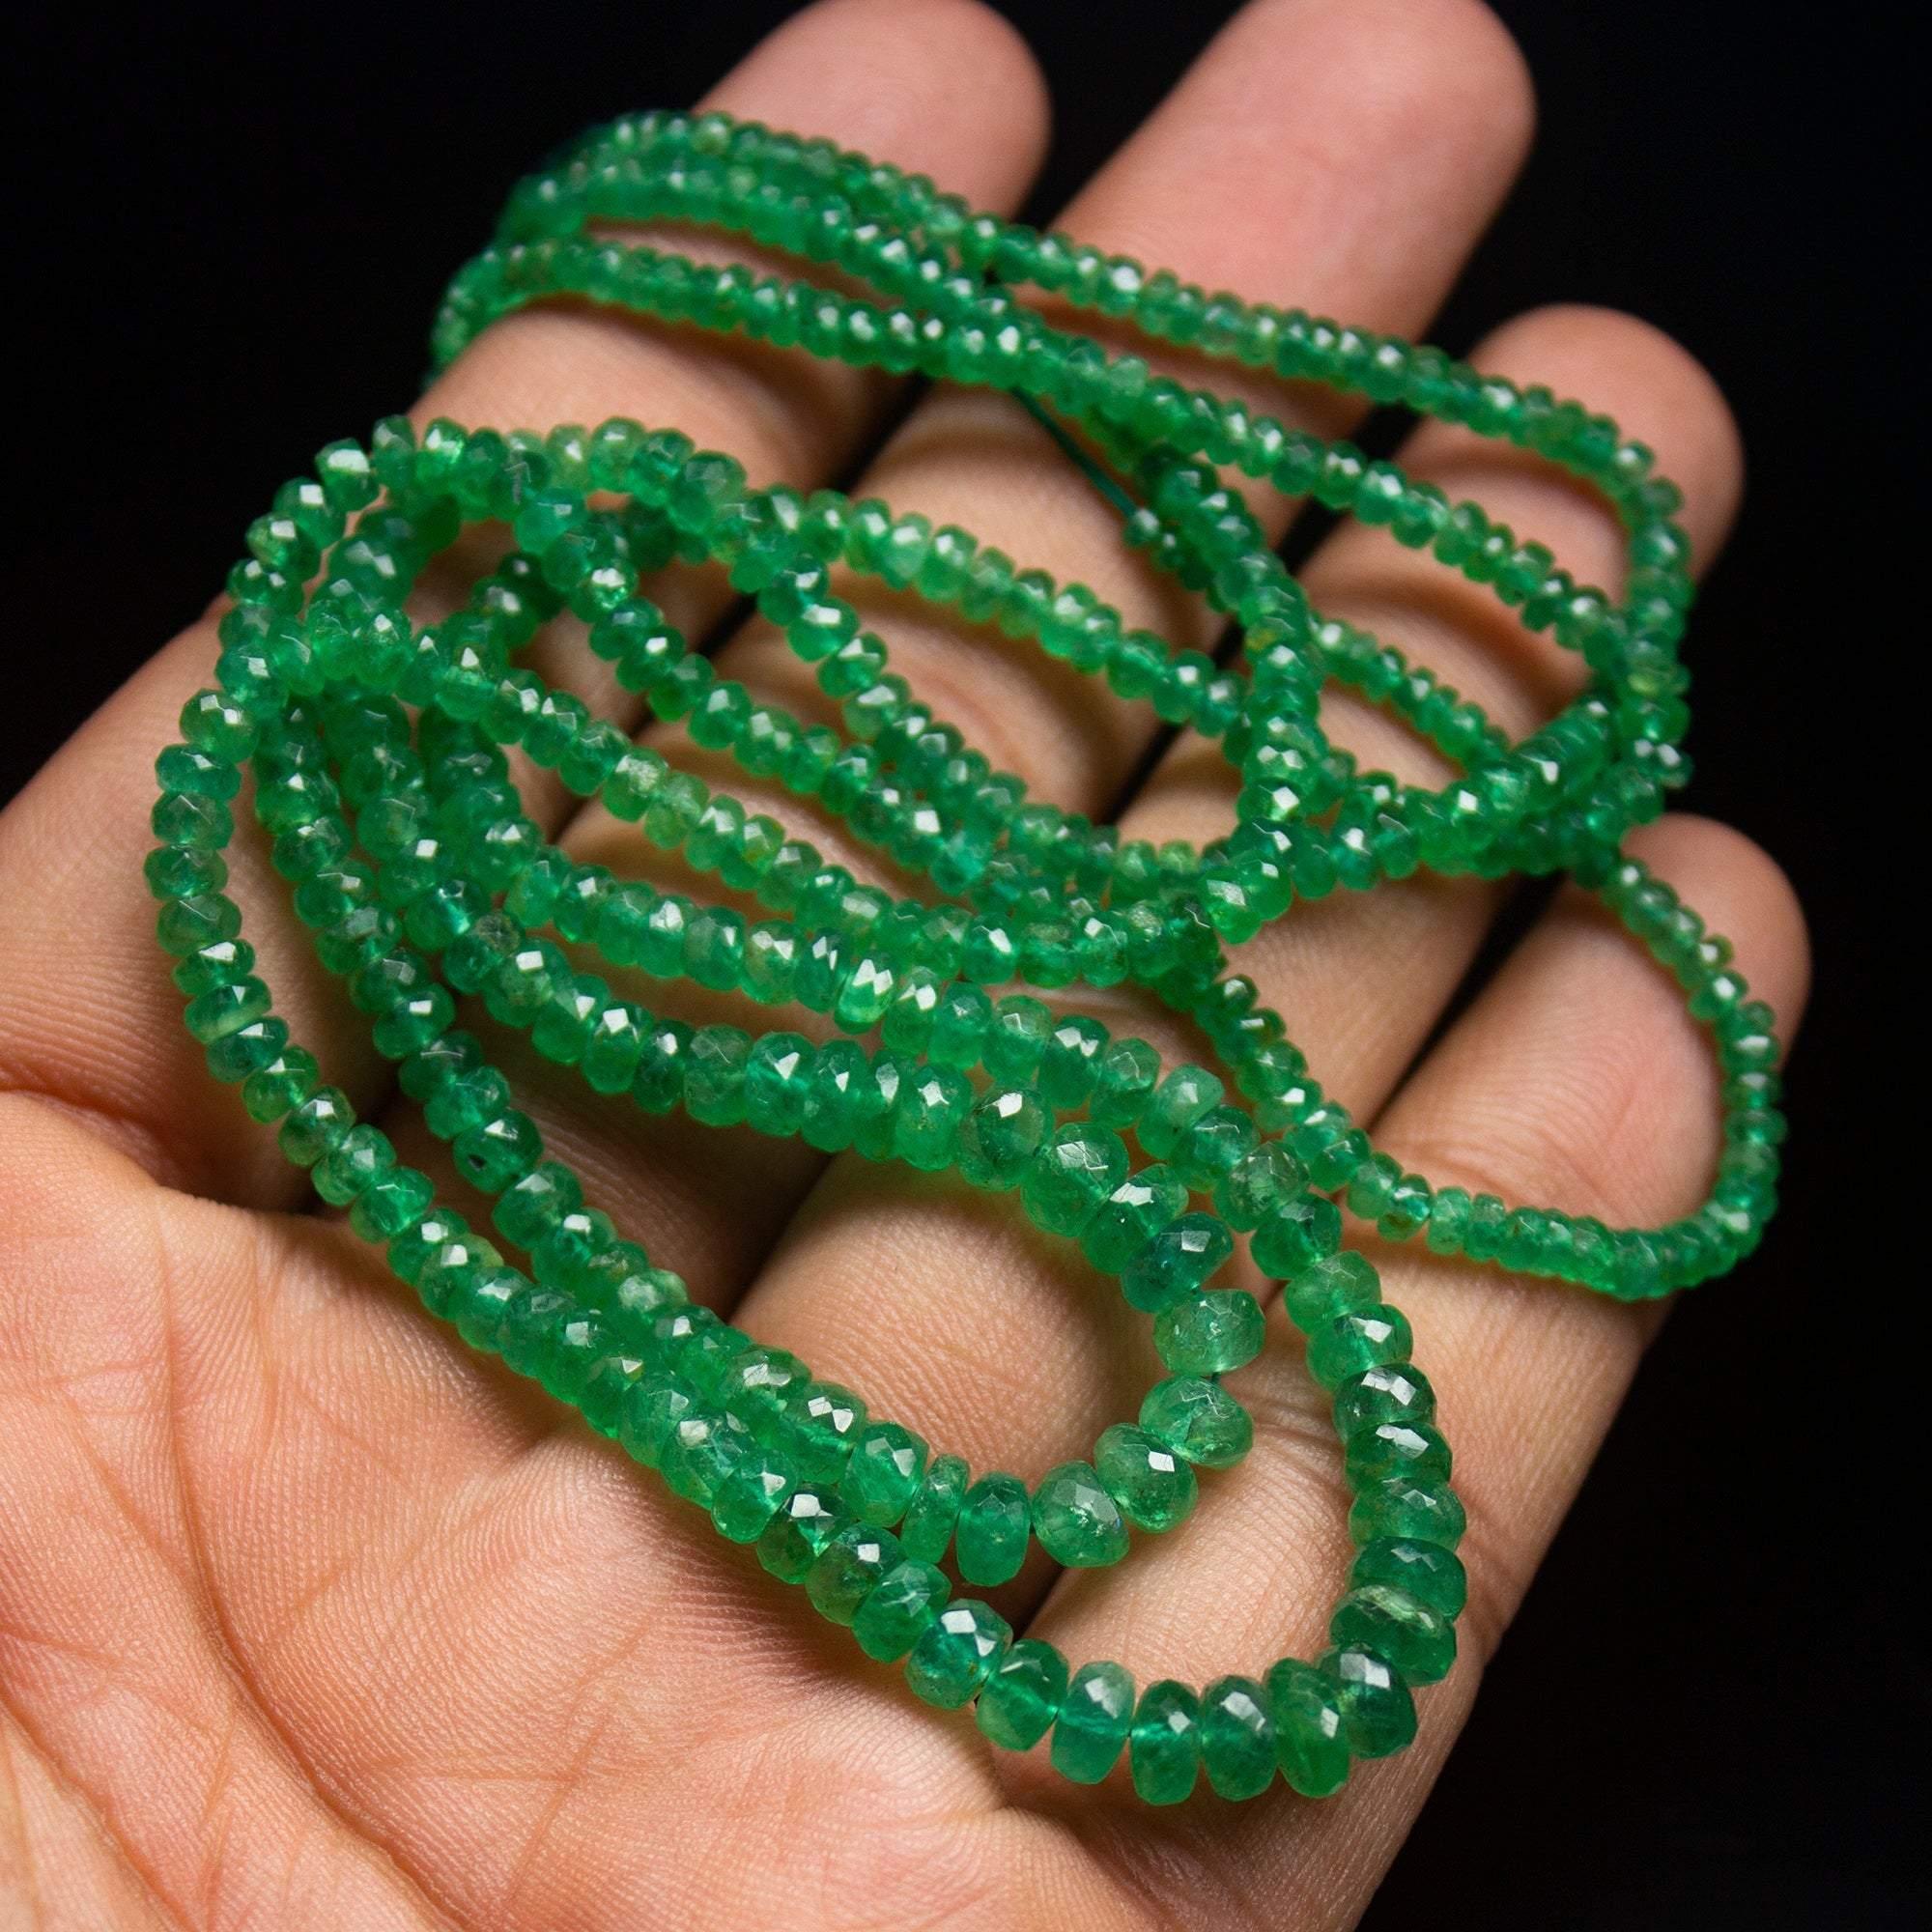 18 inch, 2-5mm, Zambian Green Emerald Faceted Rondelle Beads Strand,  Emerald Beads